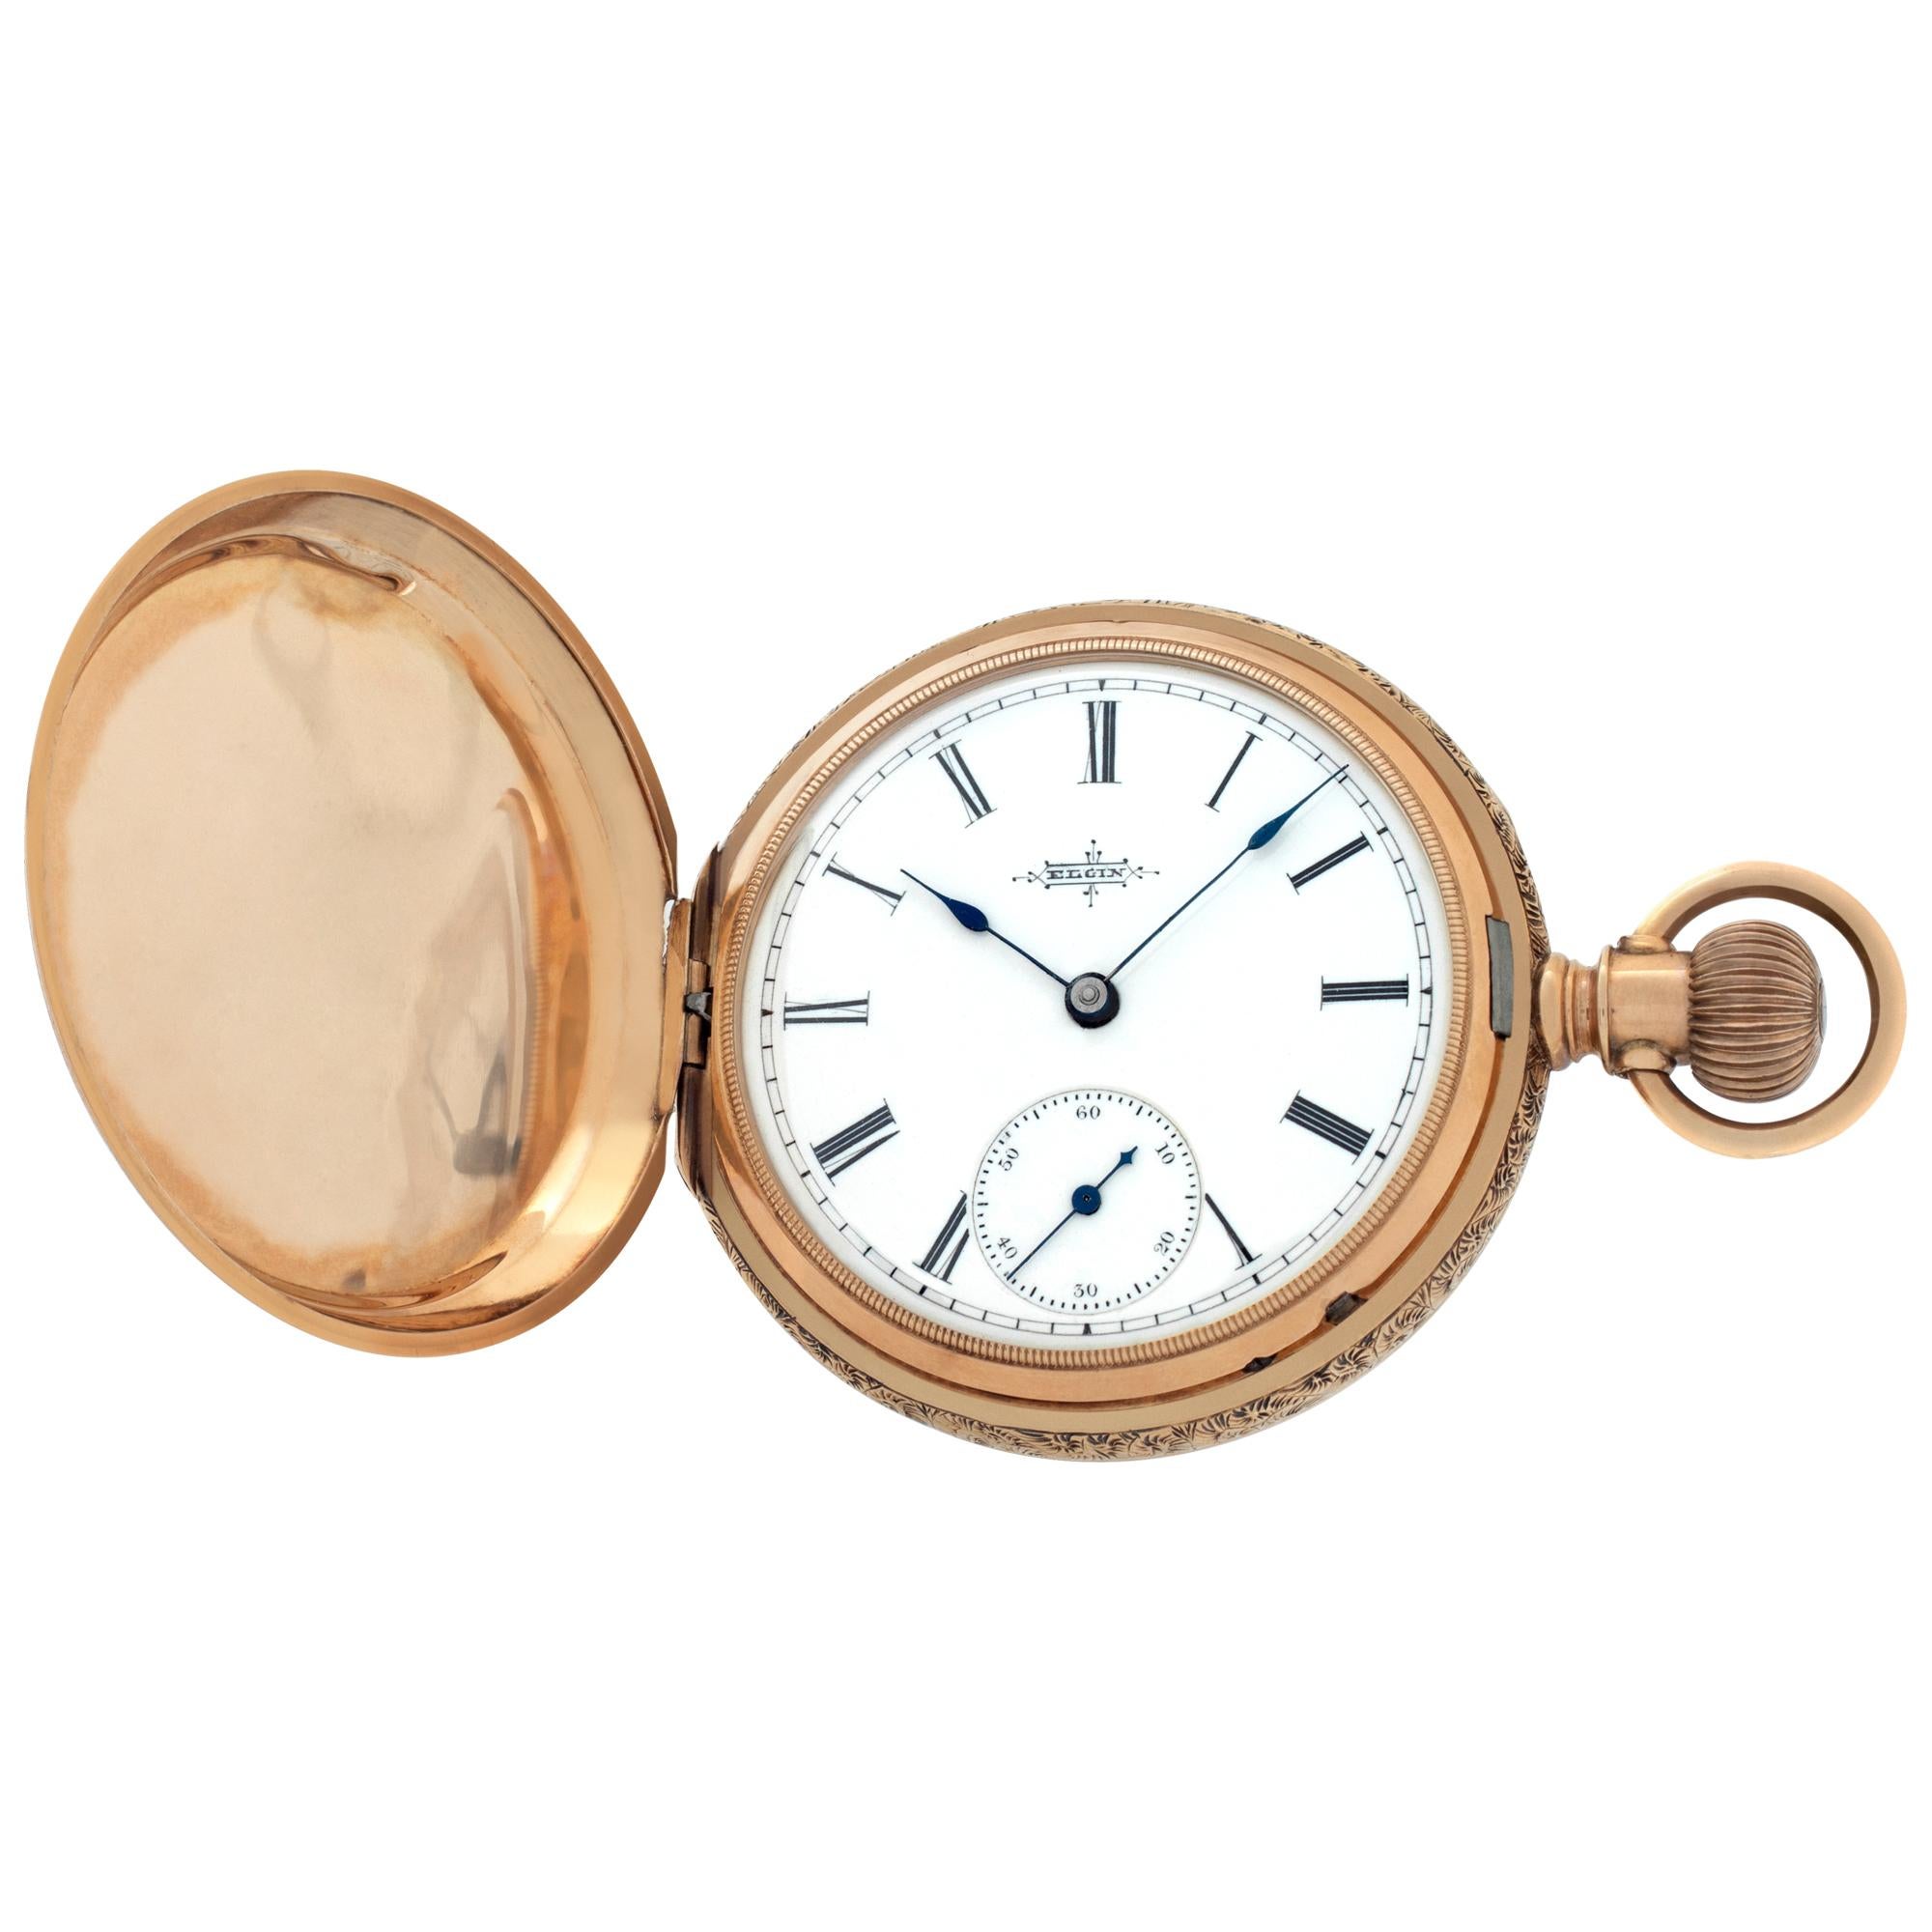 Elgin pocket watch in 14k yellow gold with floral design hunter case. 8 size (36mm case size). Manual wind with sub-seconds. Roman numeral dial. Fine Pre-owned Elgin Watch. Certified preowned Vintage Elgin pocket watch watch is made out of yellow